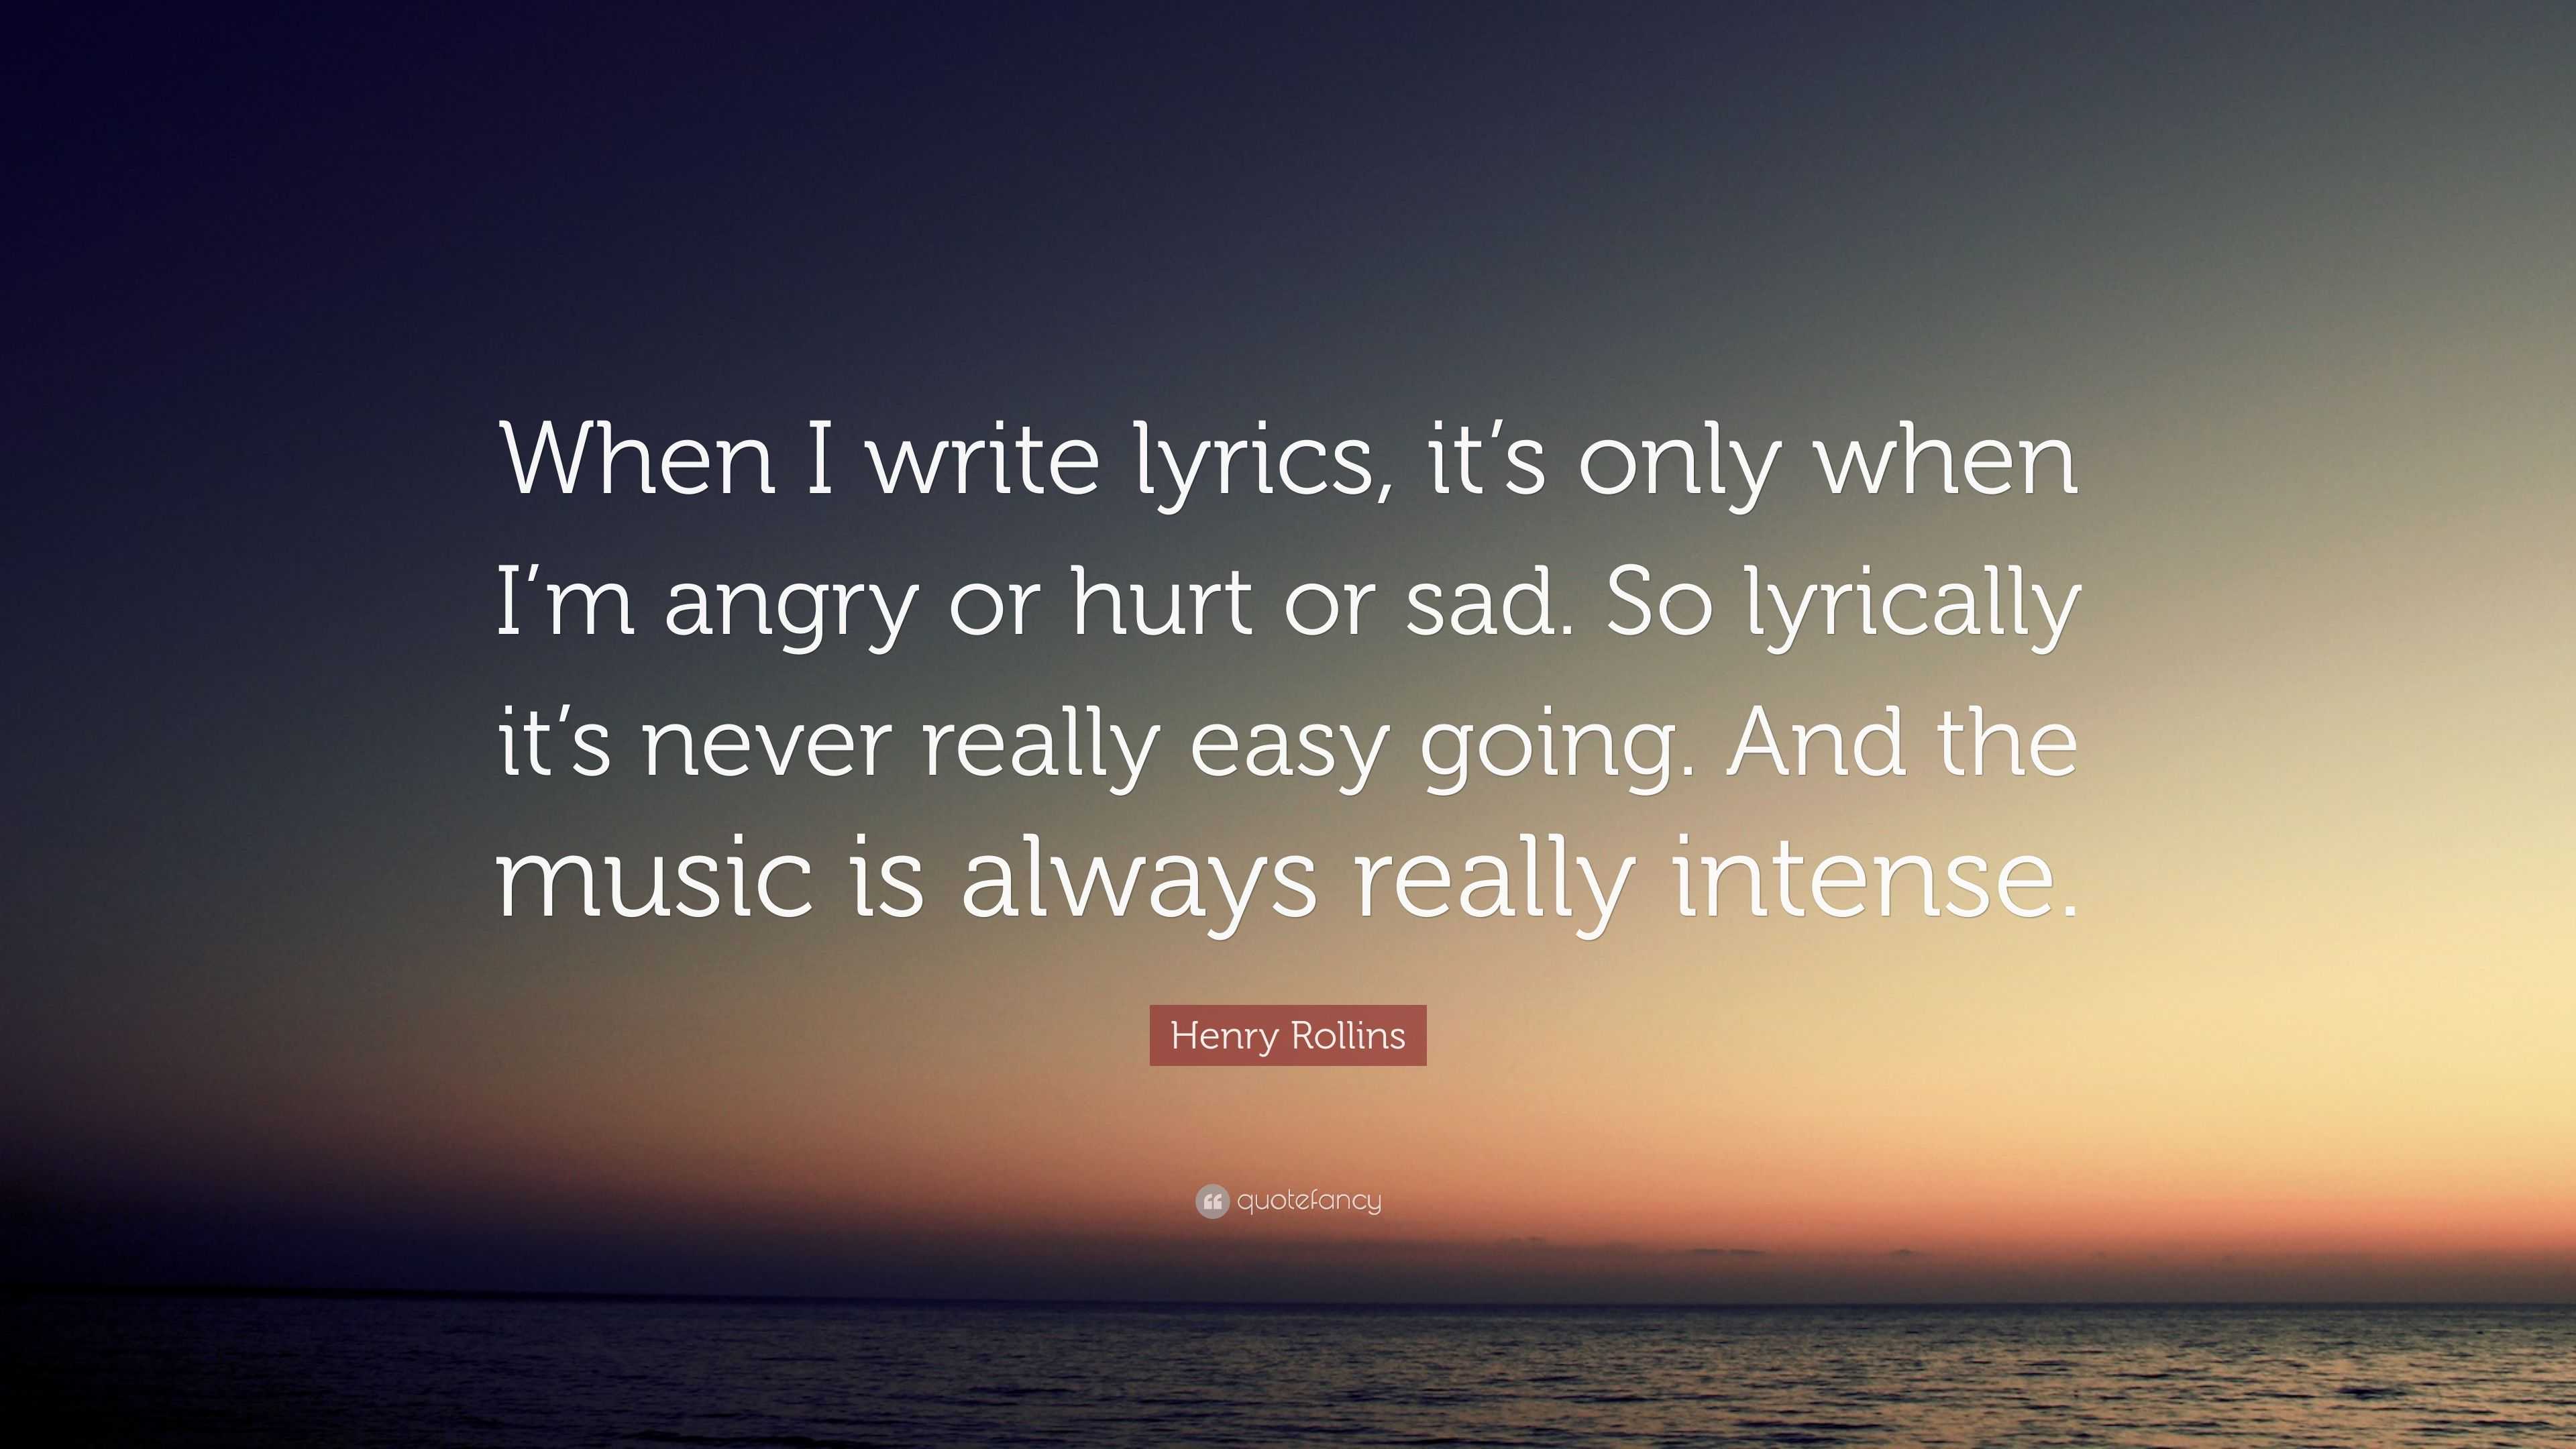 Henry Rollins Quote: “When I write lyrics, it's only when I'm